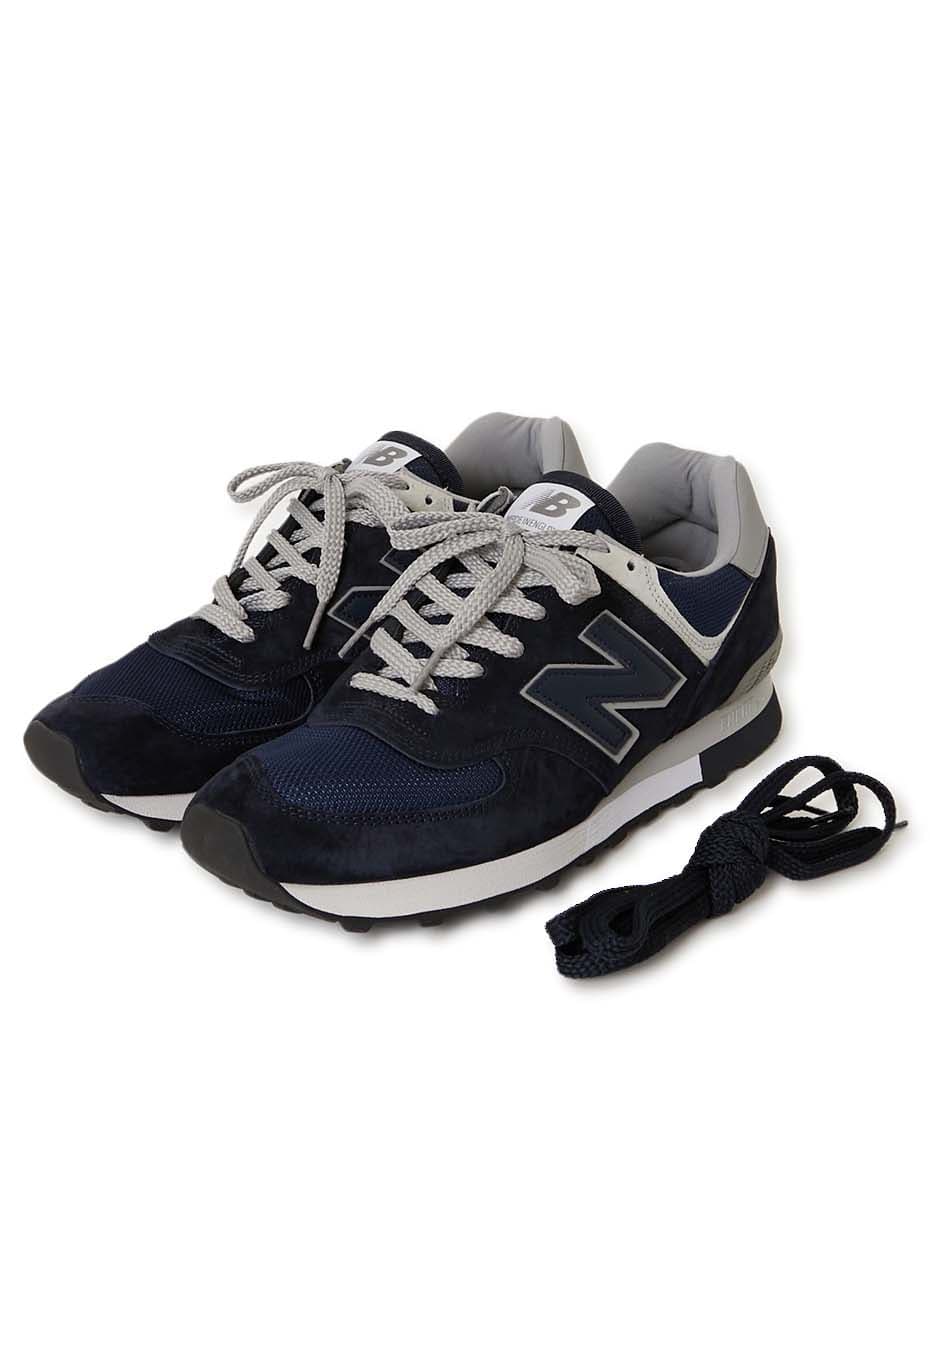 NEW BALANCE OU576 shoes MADE IN U.K.